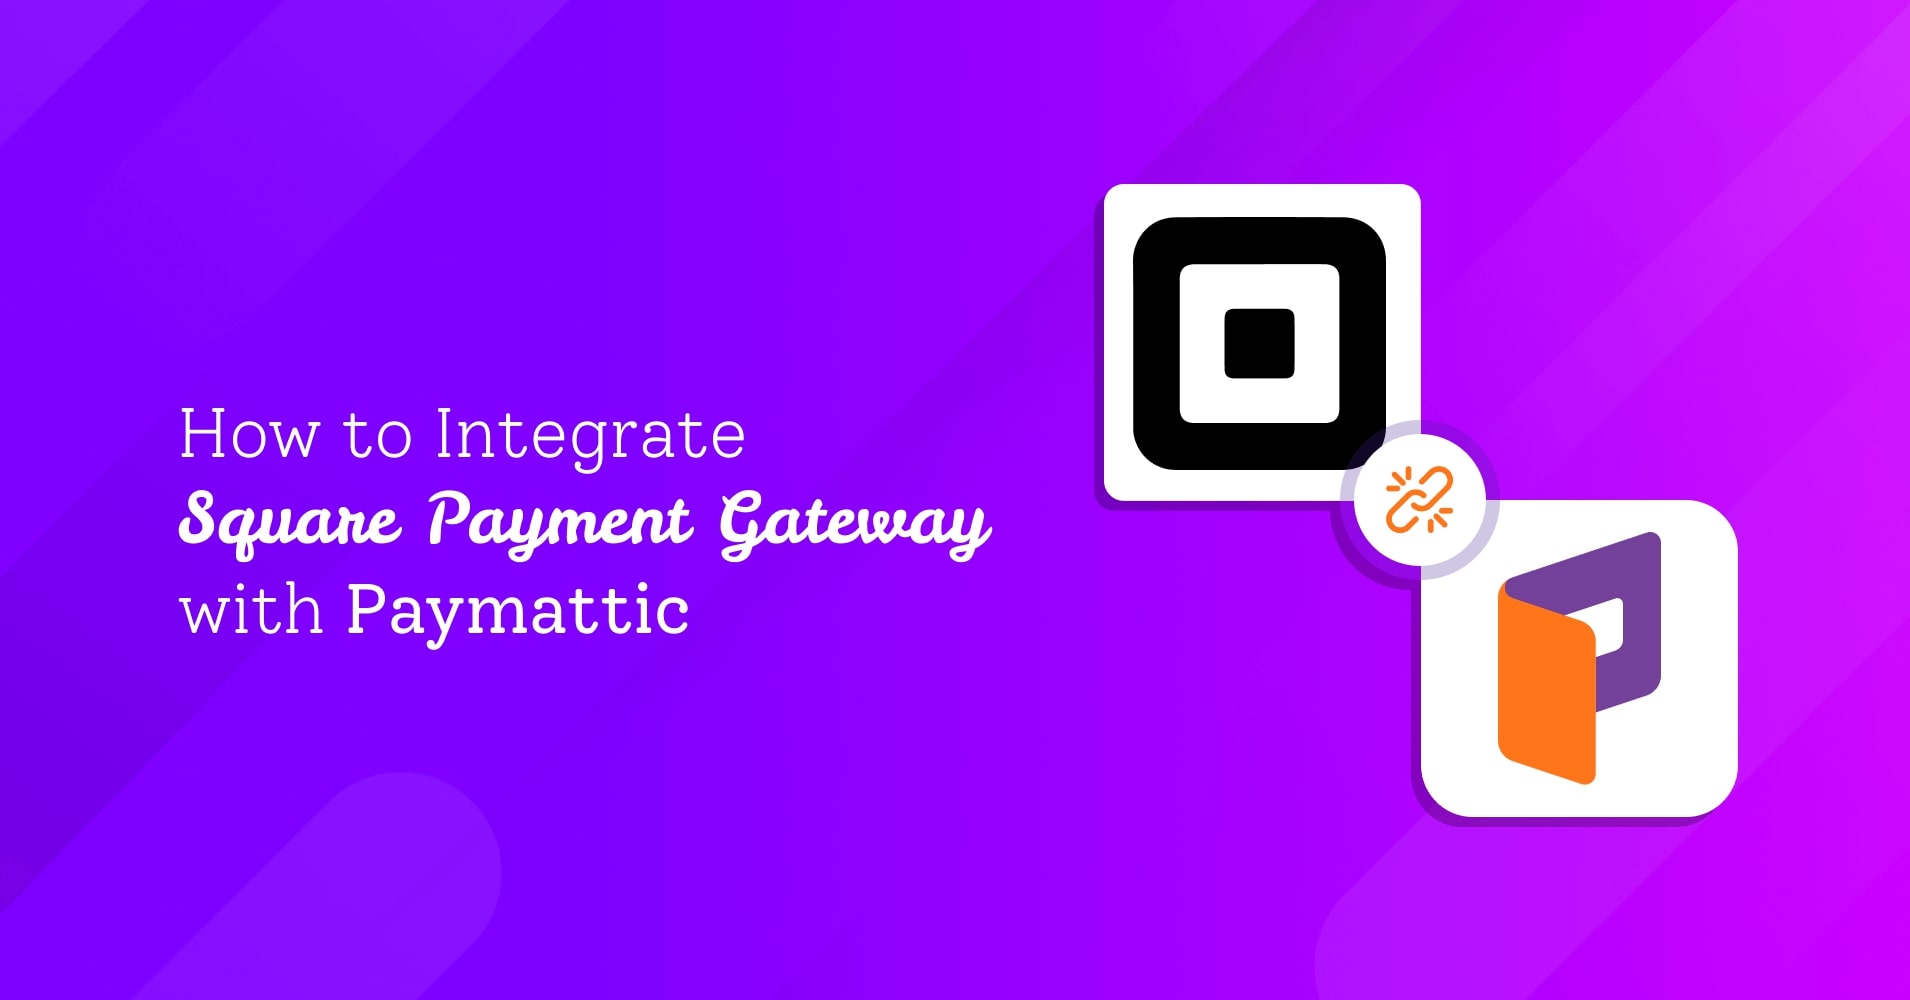 How to Integrate Square Payment Gateway with Paymattic